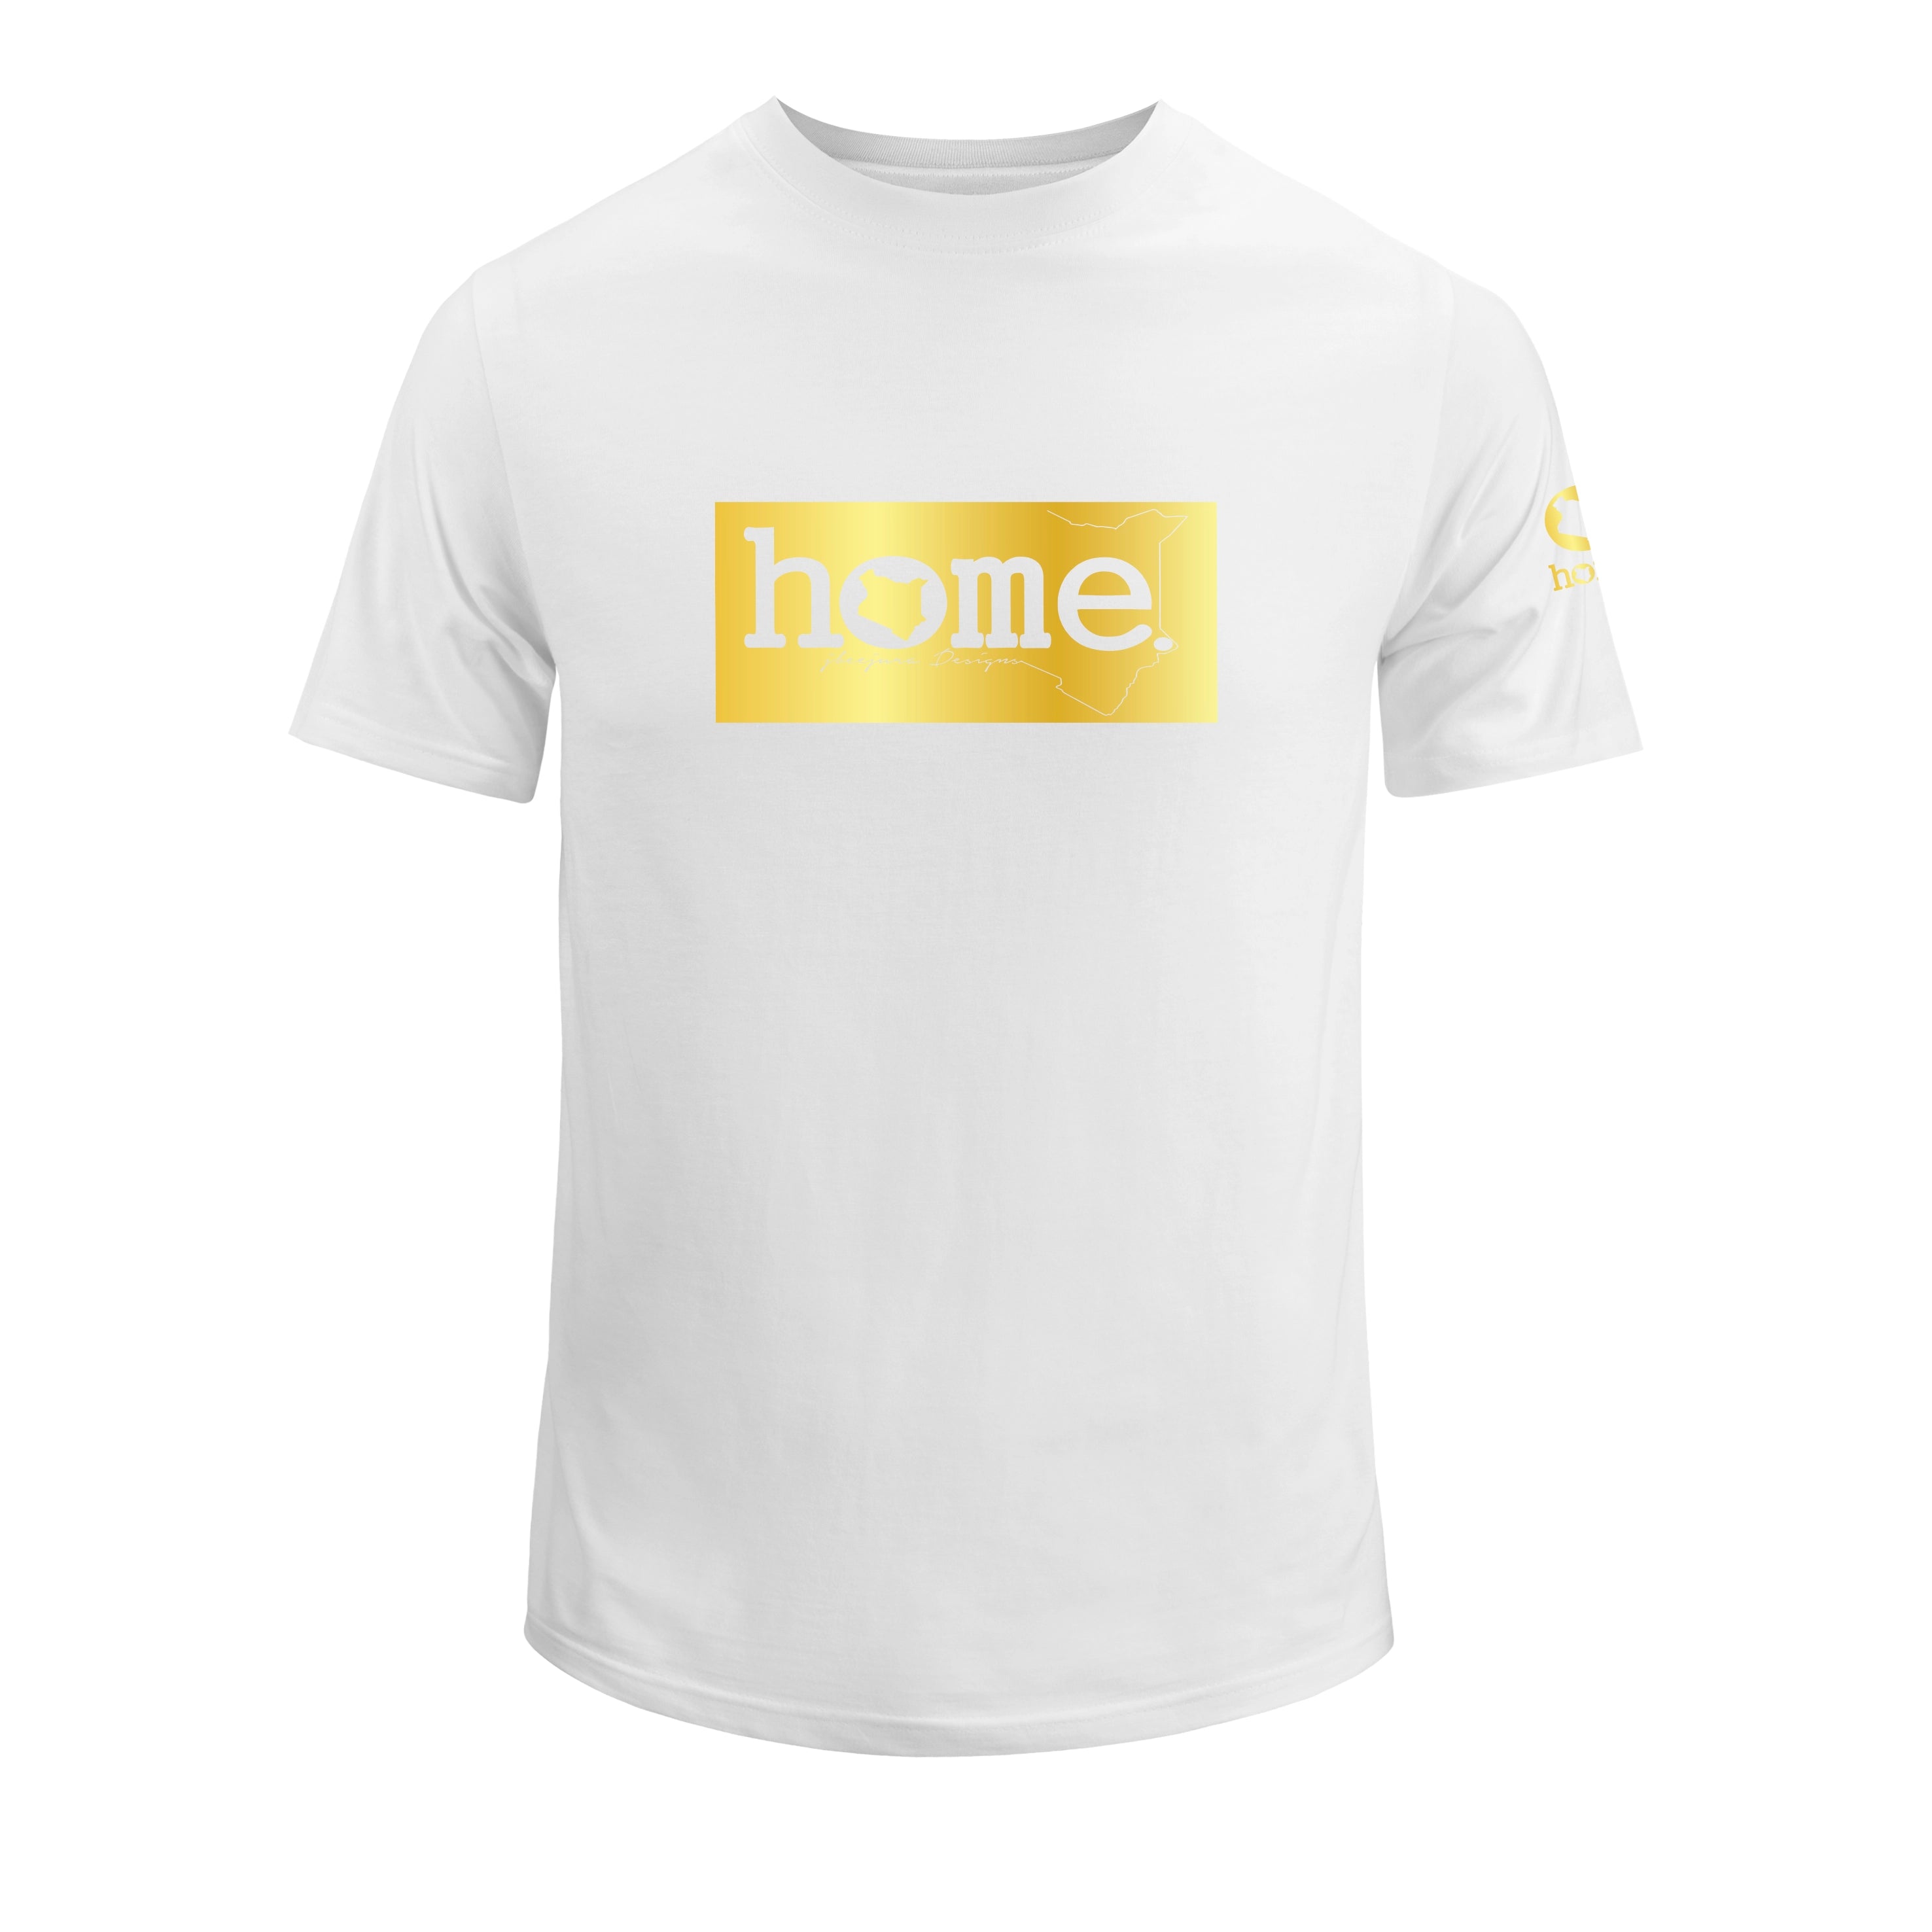 home_254 SHORT-SLEEVED WHITE T-SHIRT WITH A GOLD CLASSIC PRINT – COTTON PLUS FABRIC